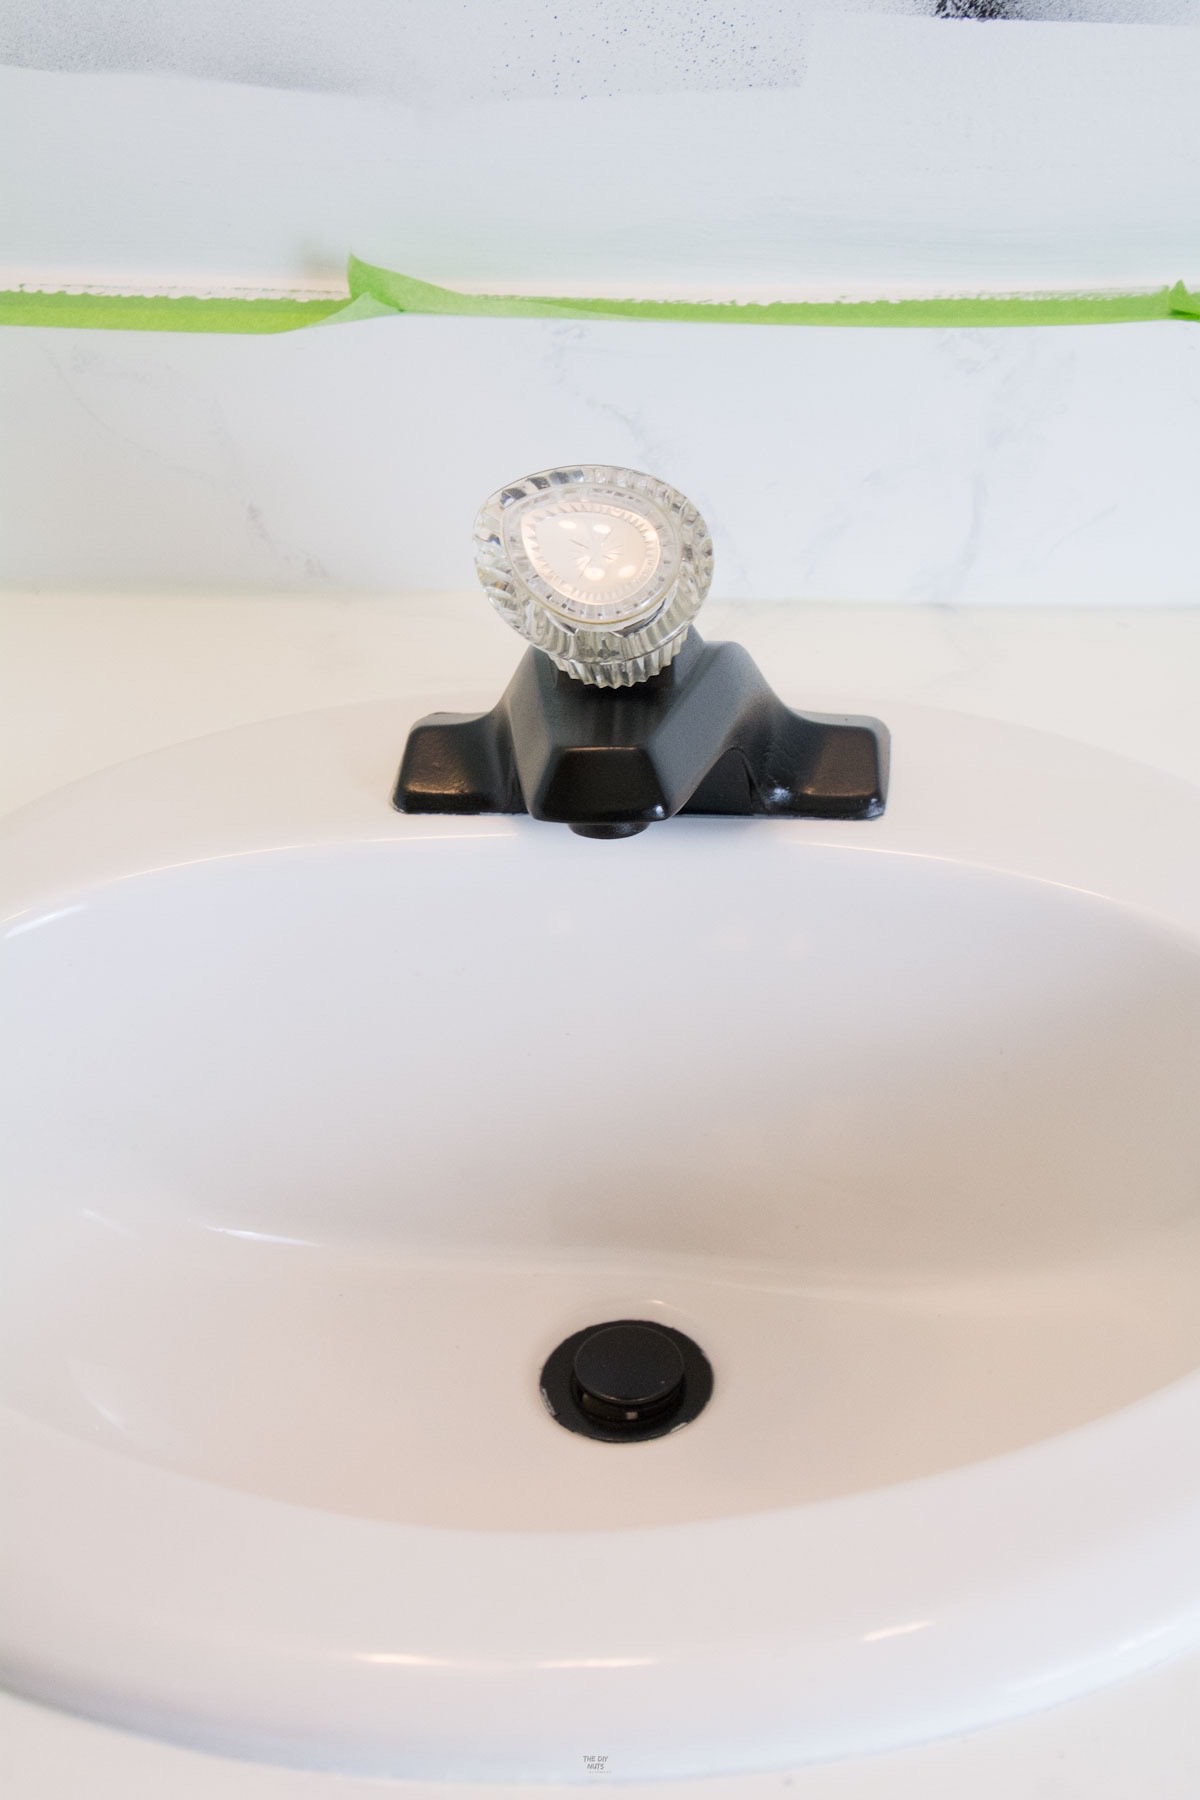 black painted faucet and drain on white ceramic sink.